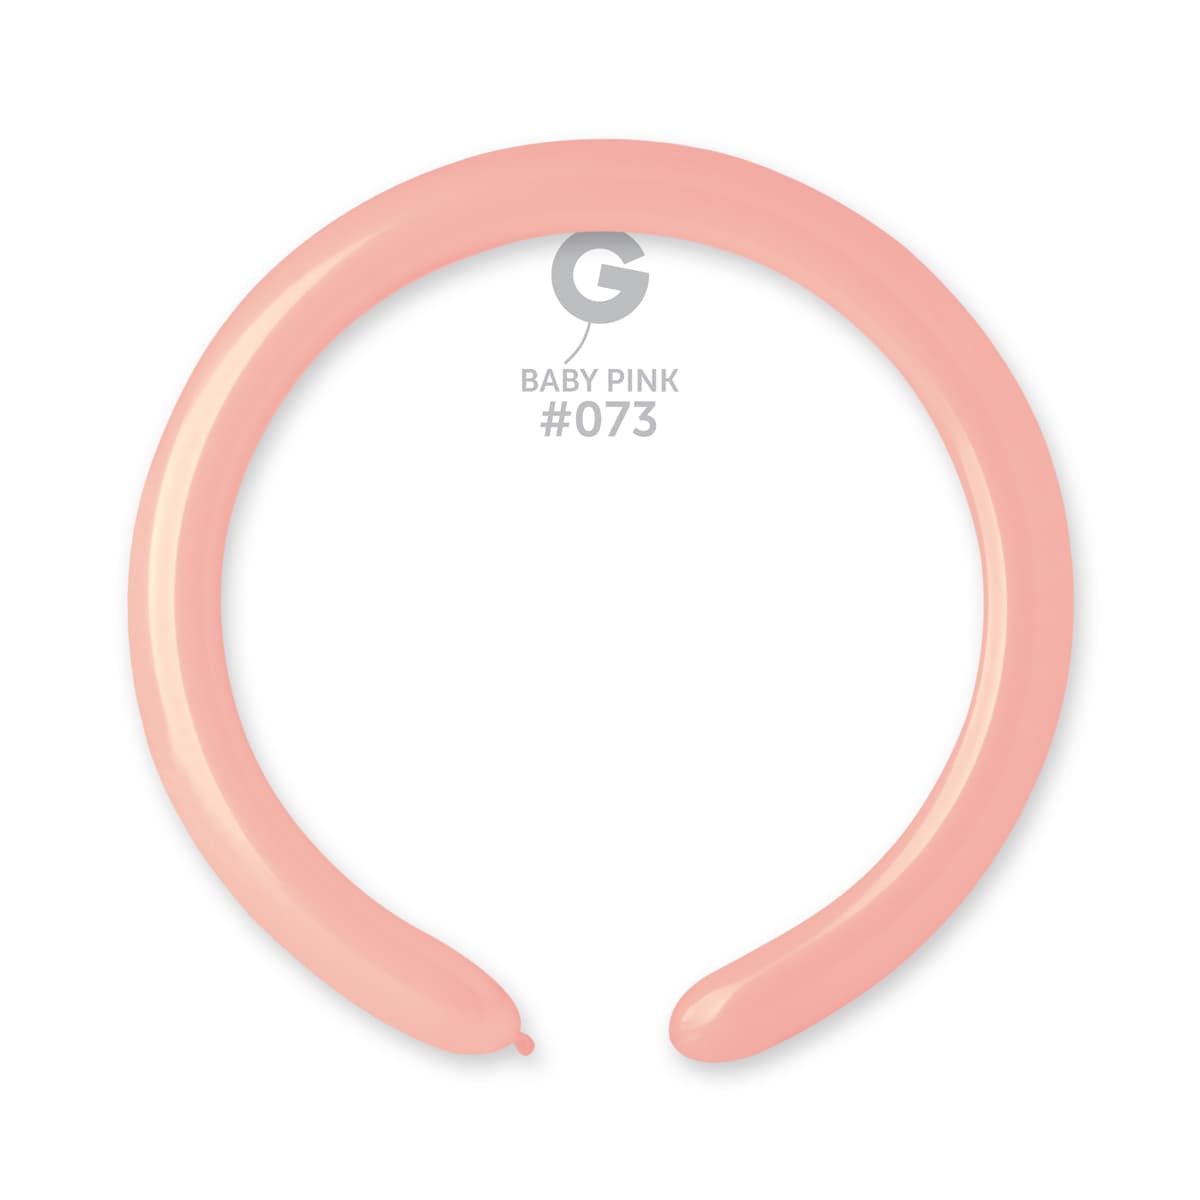 Solid balloons baby pink 2" gemar #073 260